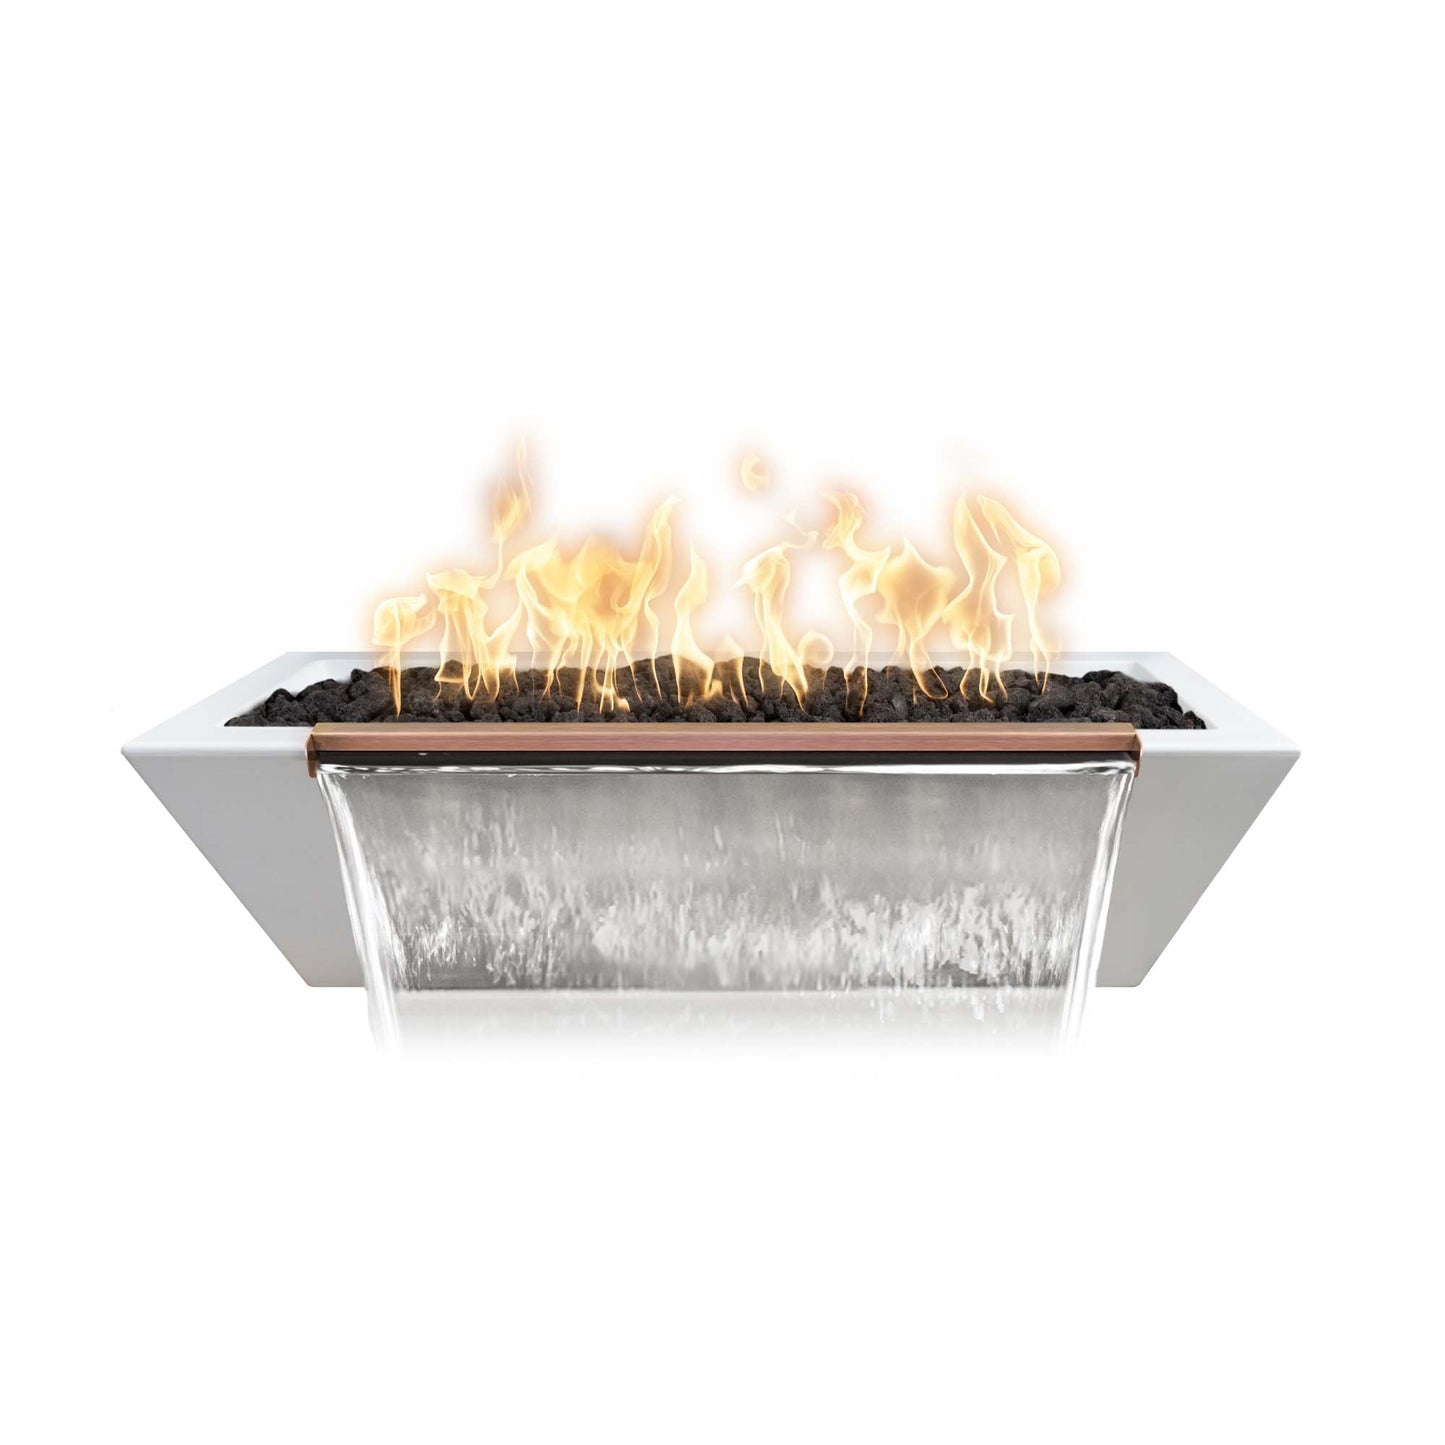 The Outdoor Plus Linear Maya 72" Black GFRC Concrete Liquid Propane Fire & Water Bowl with Match Lit Ignition